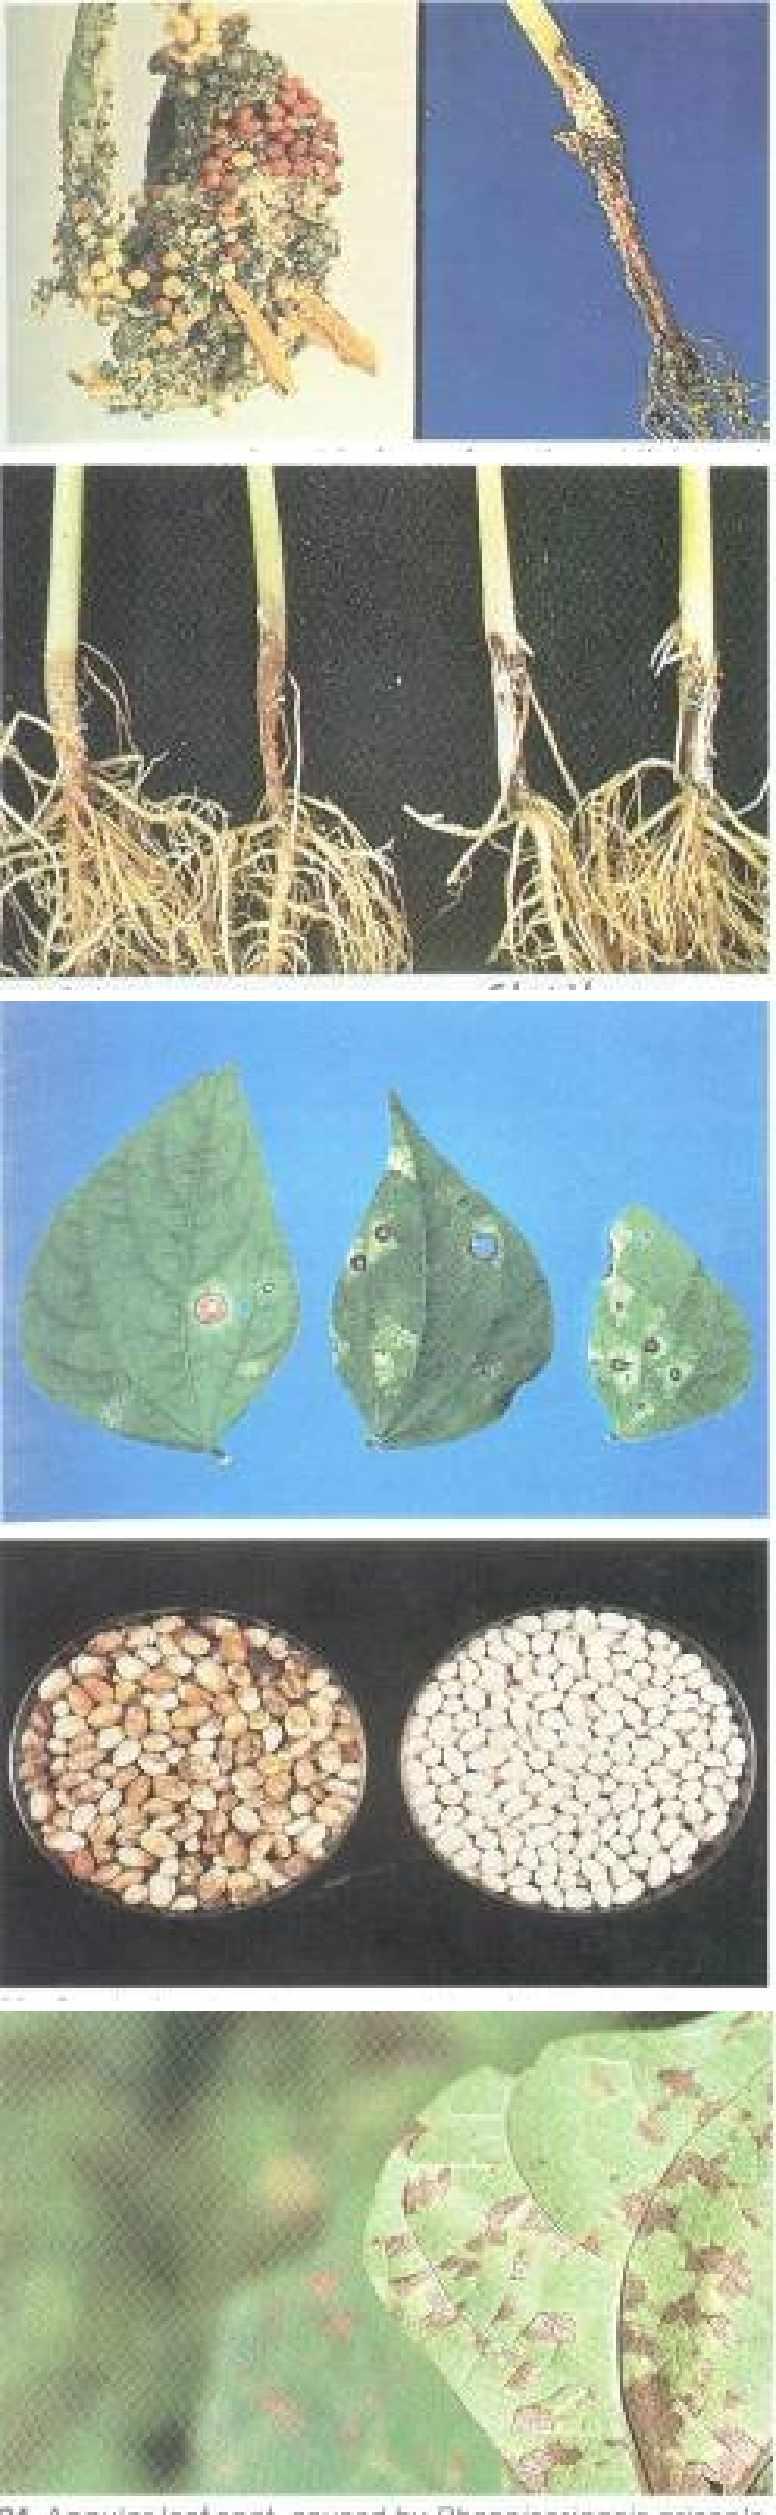 31 Lower stem and root lesions of southern blight and sclerotia produced by sclerotium rolfsii 32 Lesions on lower stem caused by sclerotium rolfsii (left ) and by a sterile basidiomycete (right).